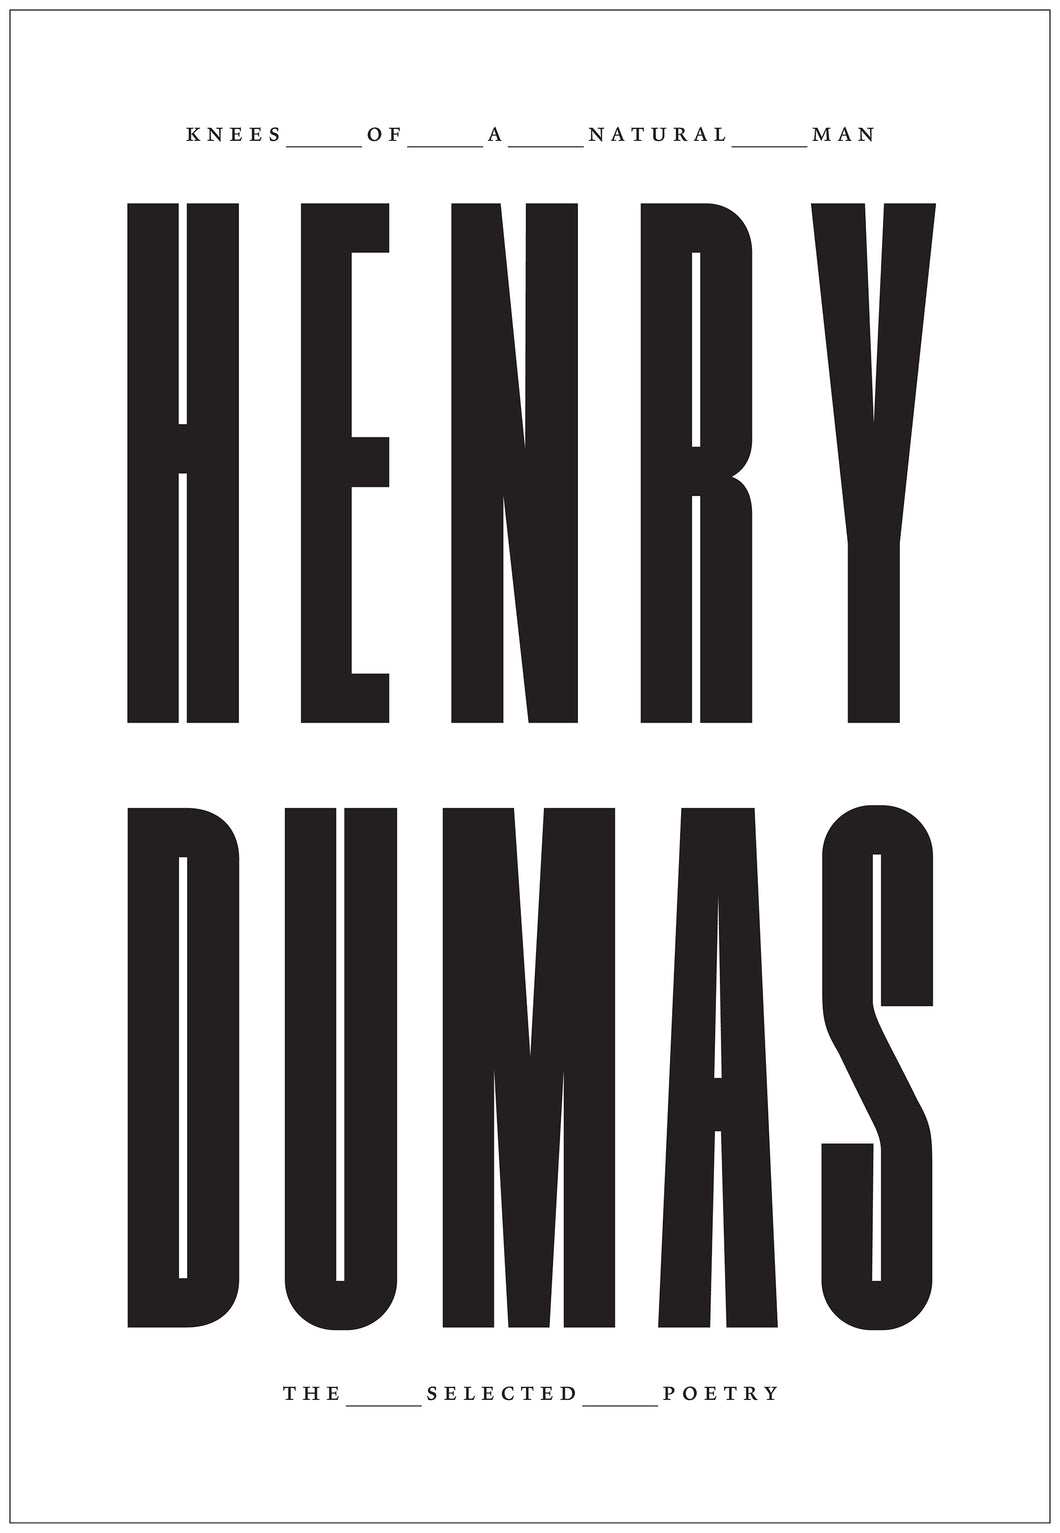 Dumas, Henry: Knees of a Natural Man: The Selected Poetry